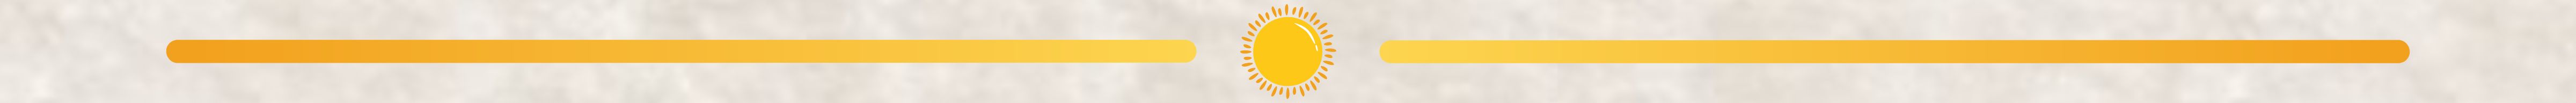 A yellow sun icon sits the center of two lines. Both lines extend outward and the color goes from yellow to orange in a warm, summery type mood.